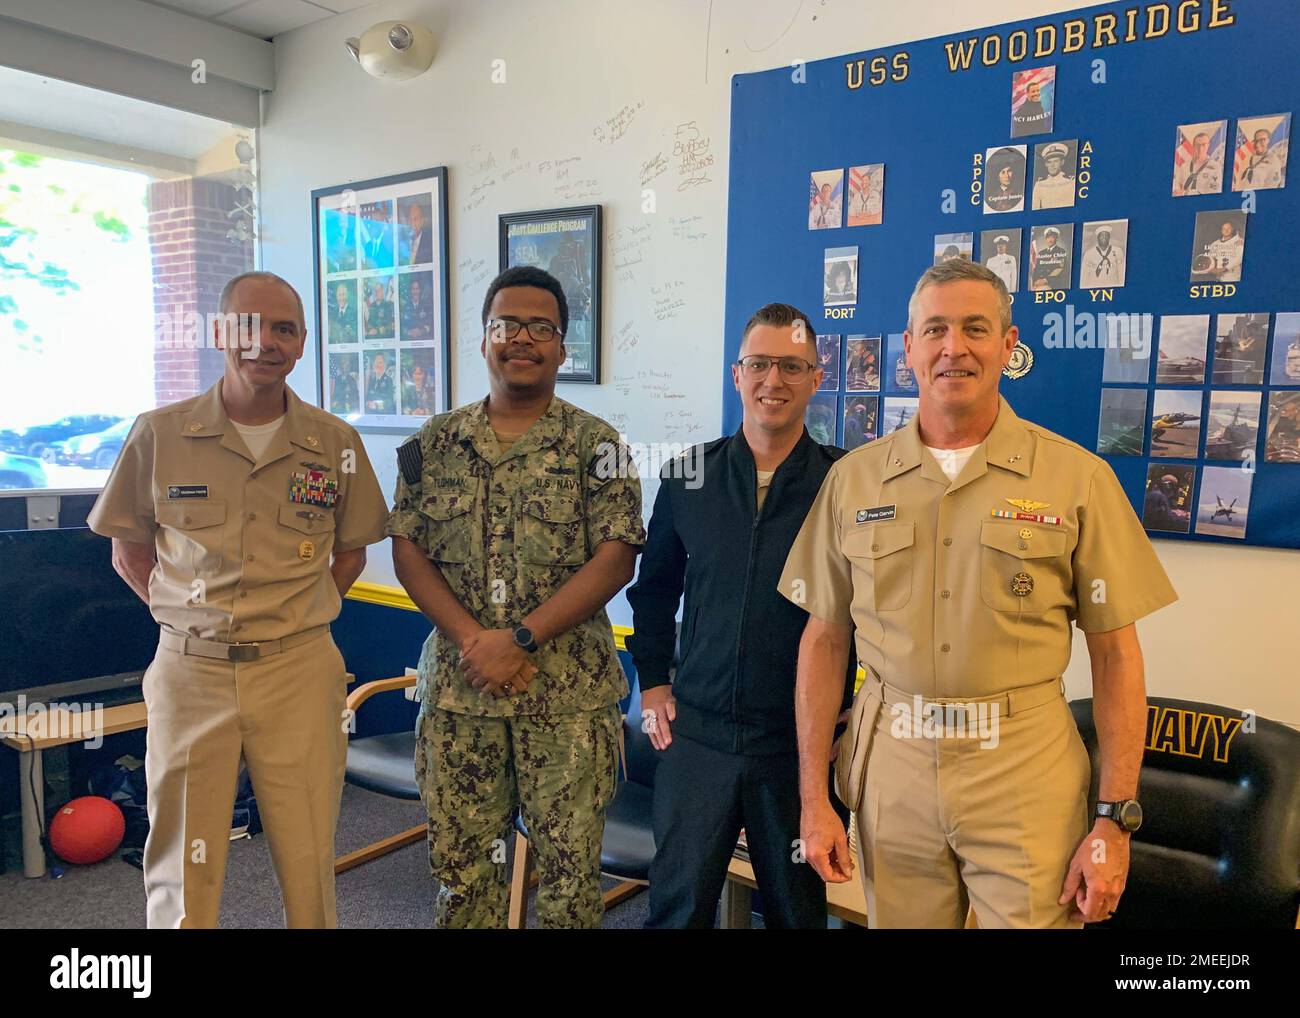 220816-N-N0443-1001 WOODBRIDGE, Va. (Aug. 16, 2022) From left, Naval Education and Training Command (NETC) Force Master Chief Matt Harris, Fire Controlman 2nd Class Marvin Tilghman, Sonar Technician (Surface) 2nd Class Marlin Boucher, and Rear Adm. Pete Garvin, NETC commander, pose for a photo at Navy Recruiting Station Woodbridge, Virginia, Aug. 16, 2022.  Garvin and Harris visited the recruiting station to talk with recruiters about their mission to inform, attract, influence and hire the highest quality candidates from America's diverse talent pool. As the owner of the Force Development pil Stock Photo